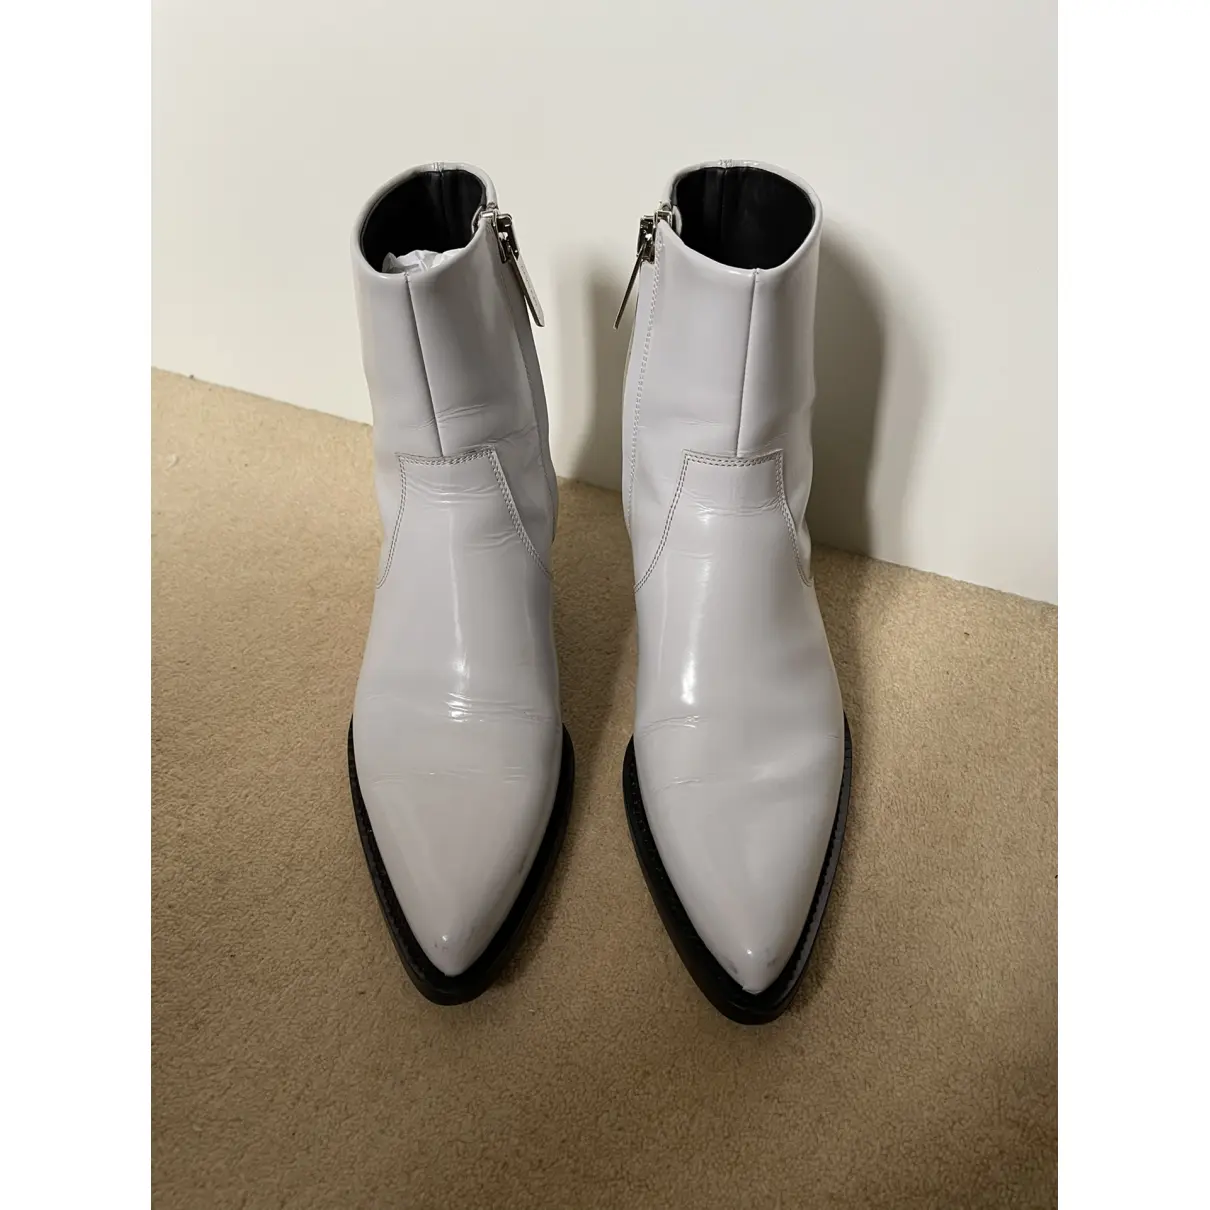 Buy Calvin Klein 205W39NYC Patent leather western boots online